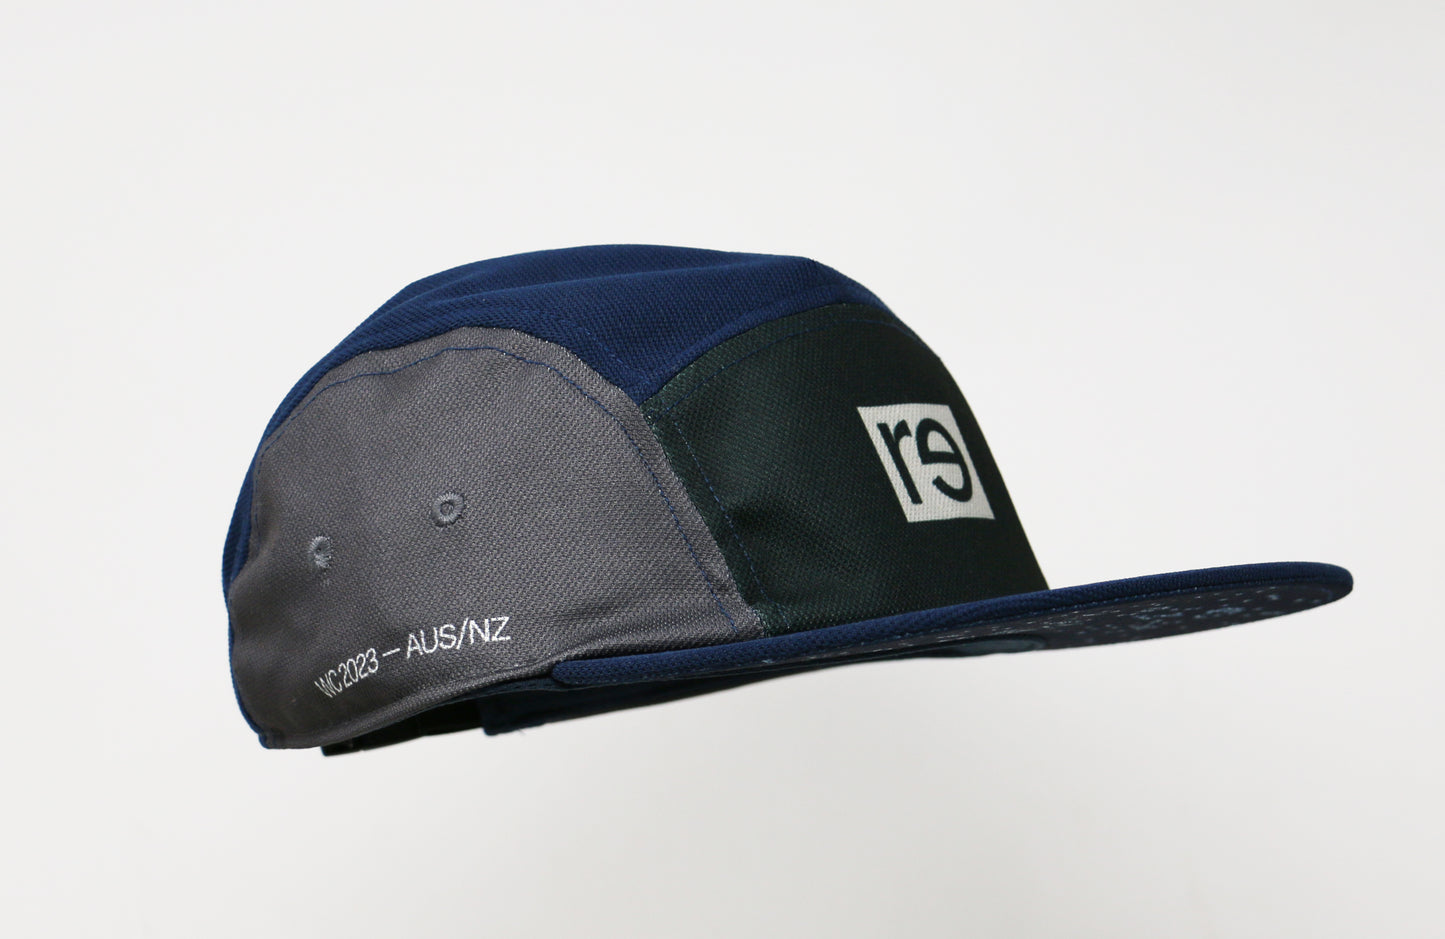 RE—INC x Storied Hats World Cup Hat